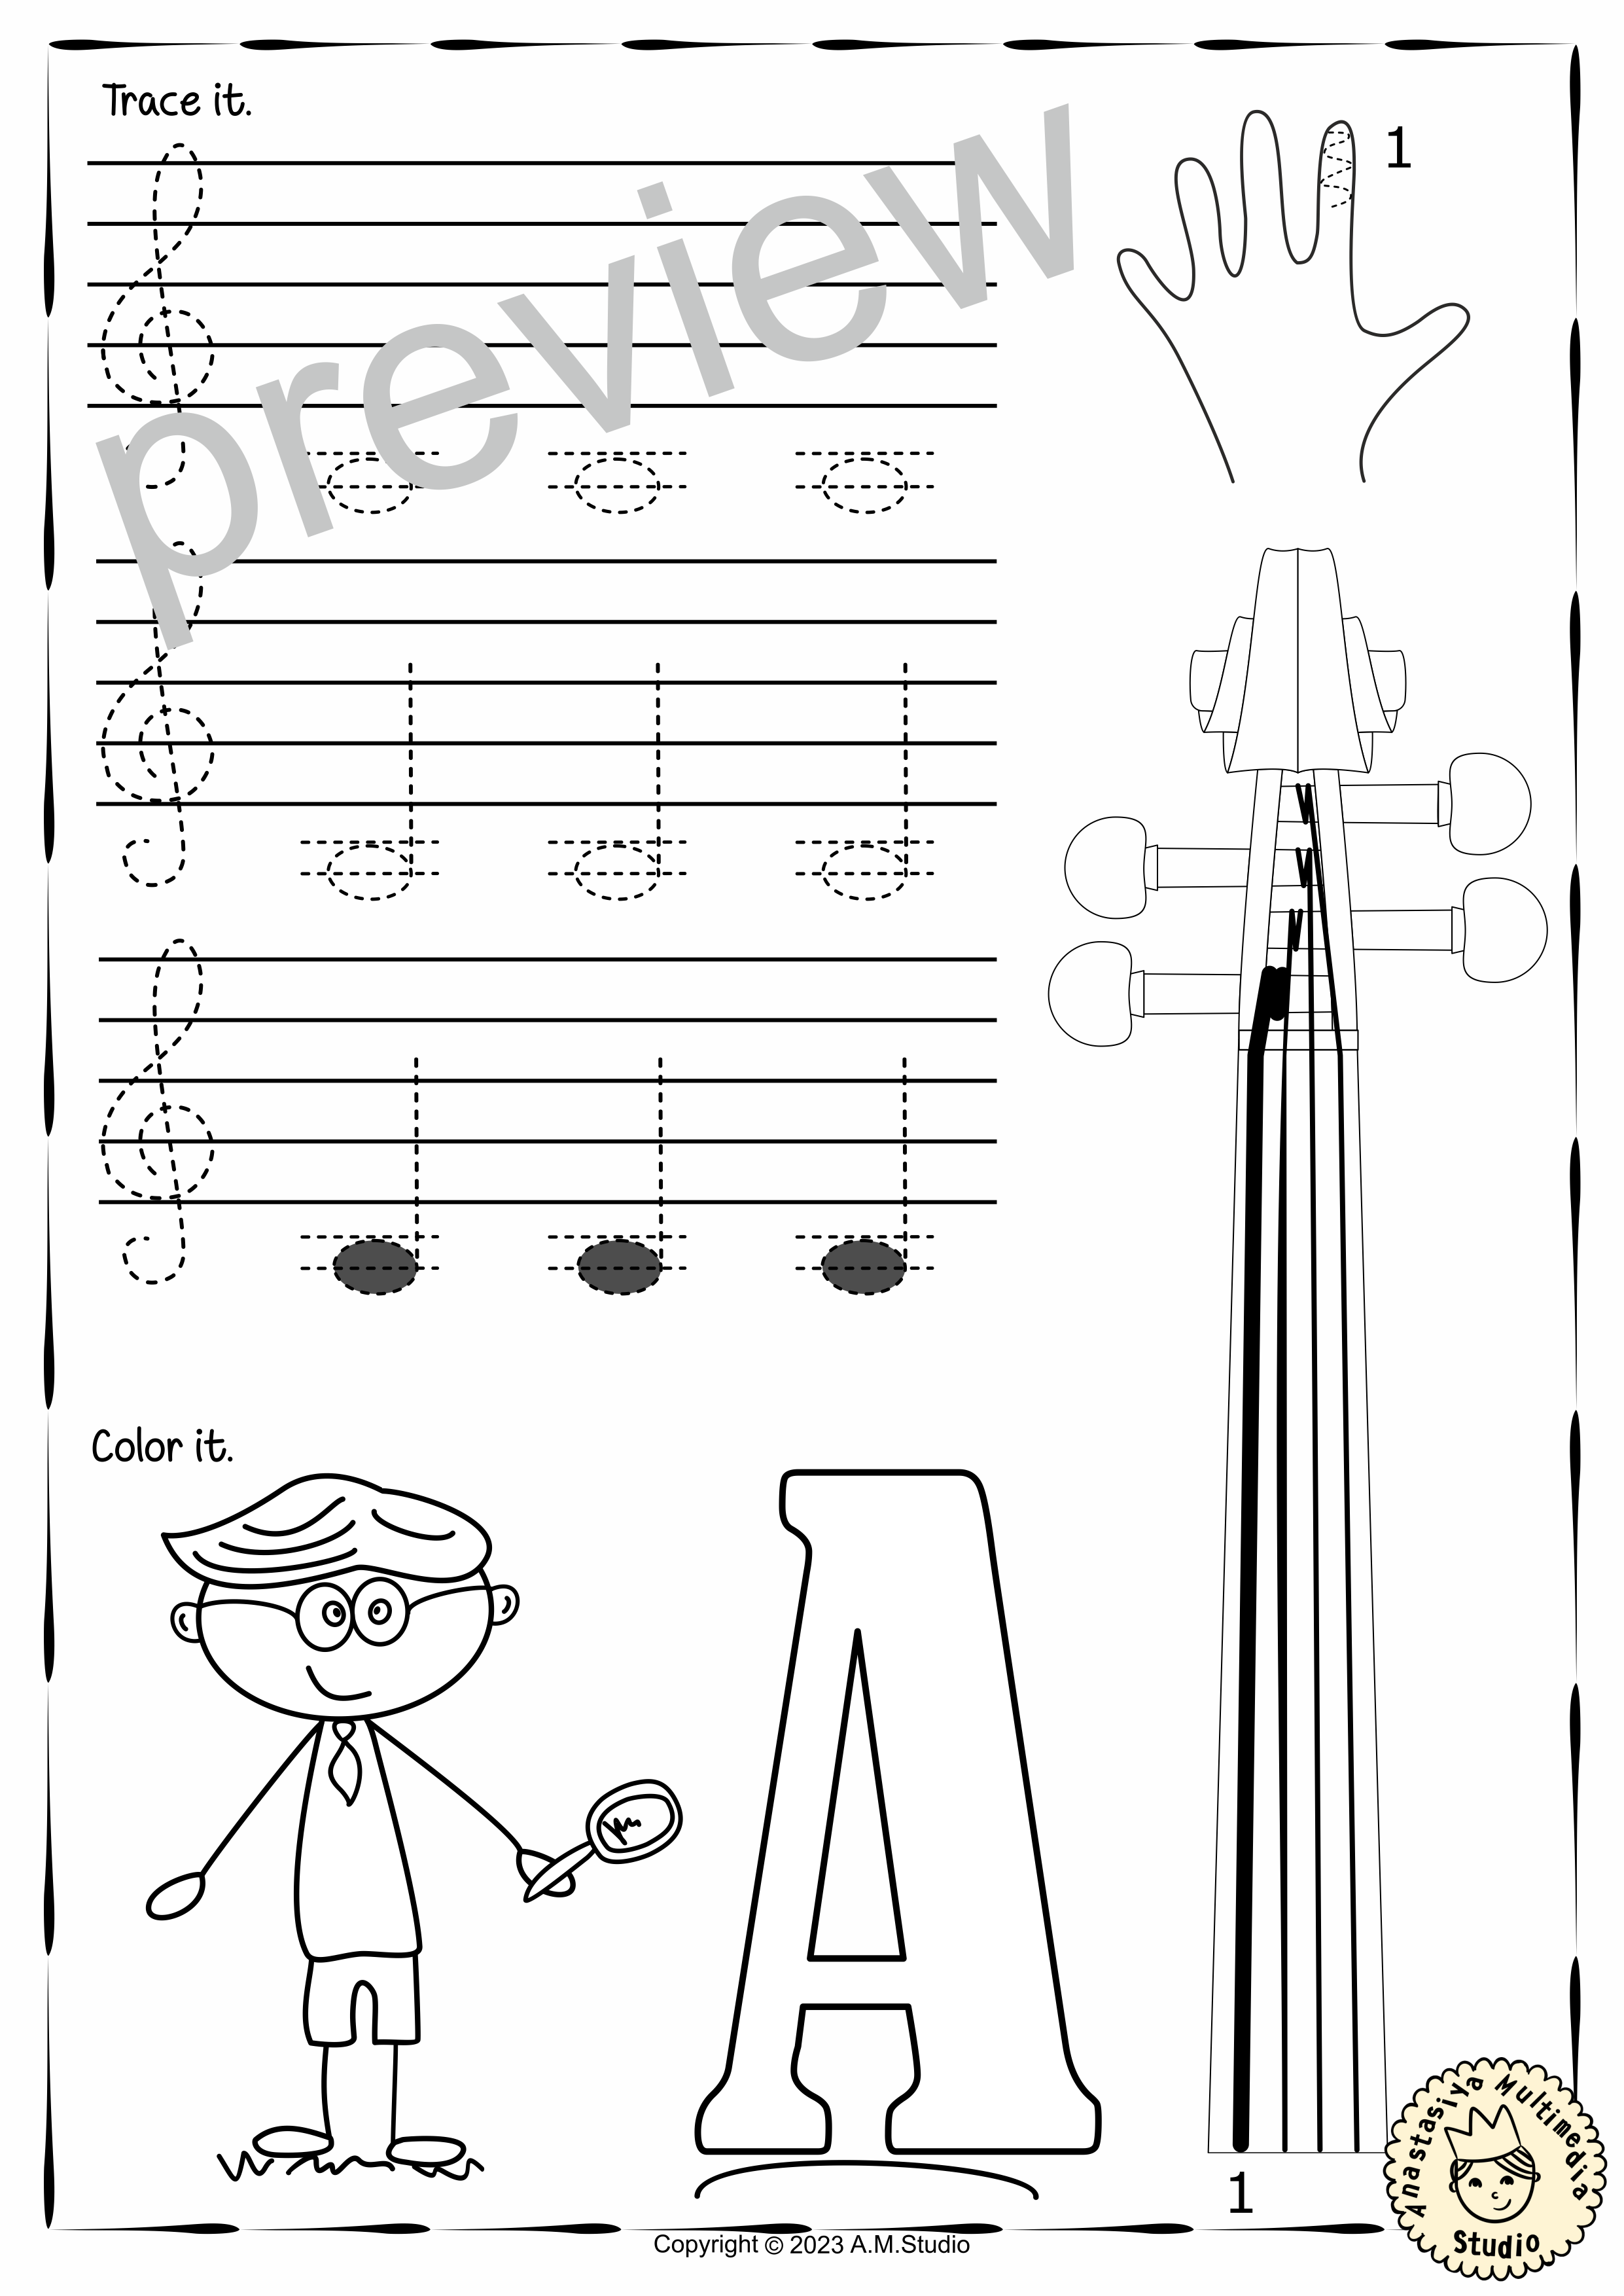 Music Tracing Notes Worksheets for Violin Students (img # 1)